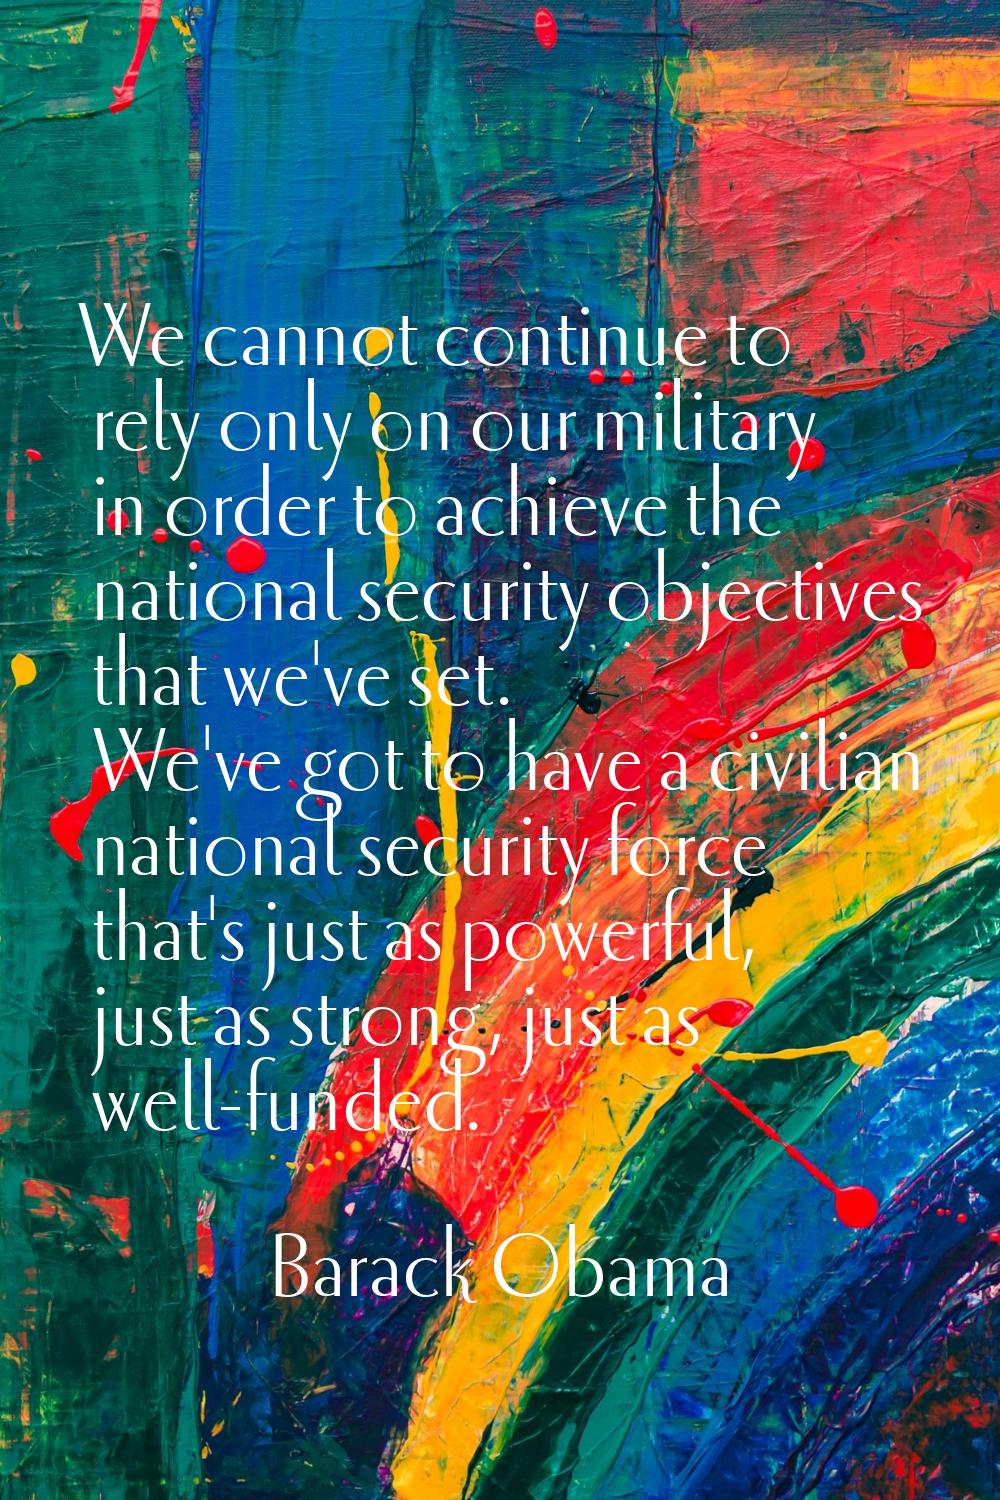 We cannot continue to rely only on our military in order to achieve the national security objective